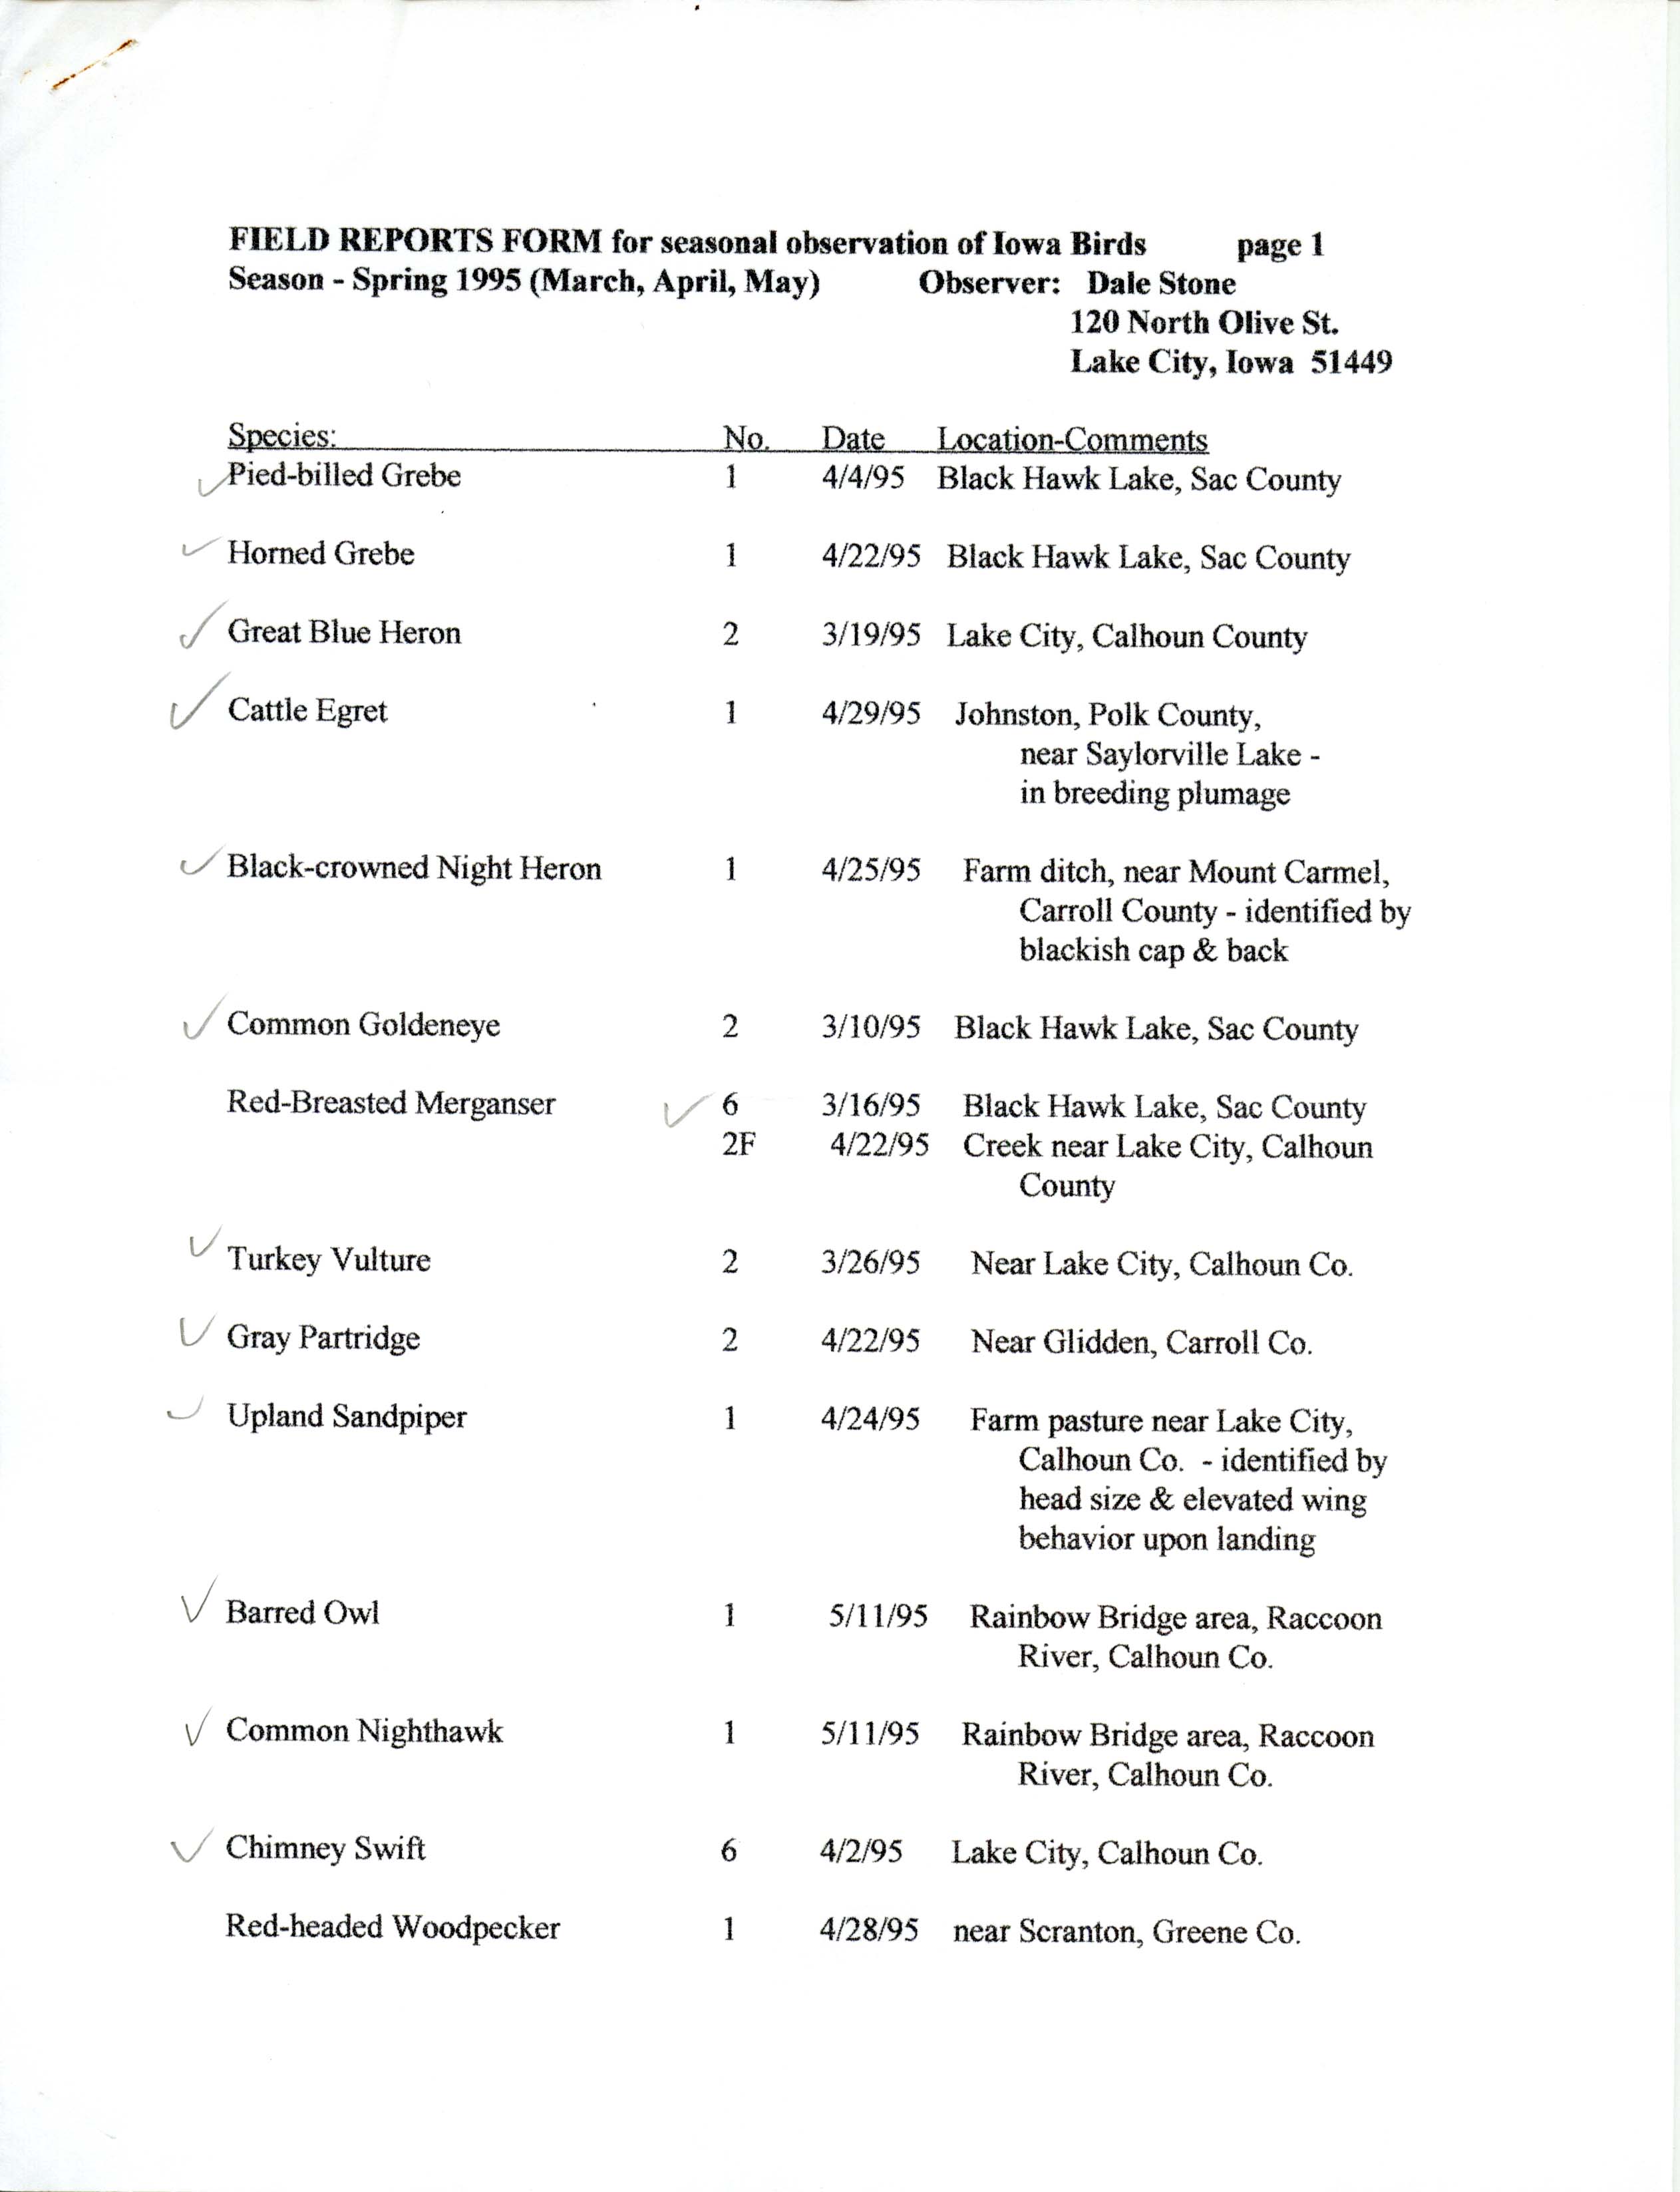 Field reports form for submitting seasonal observations of Iowa birds, spring 1995, Dale Stone